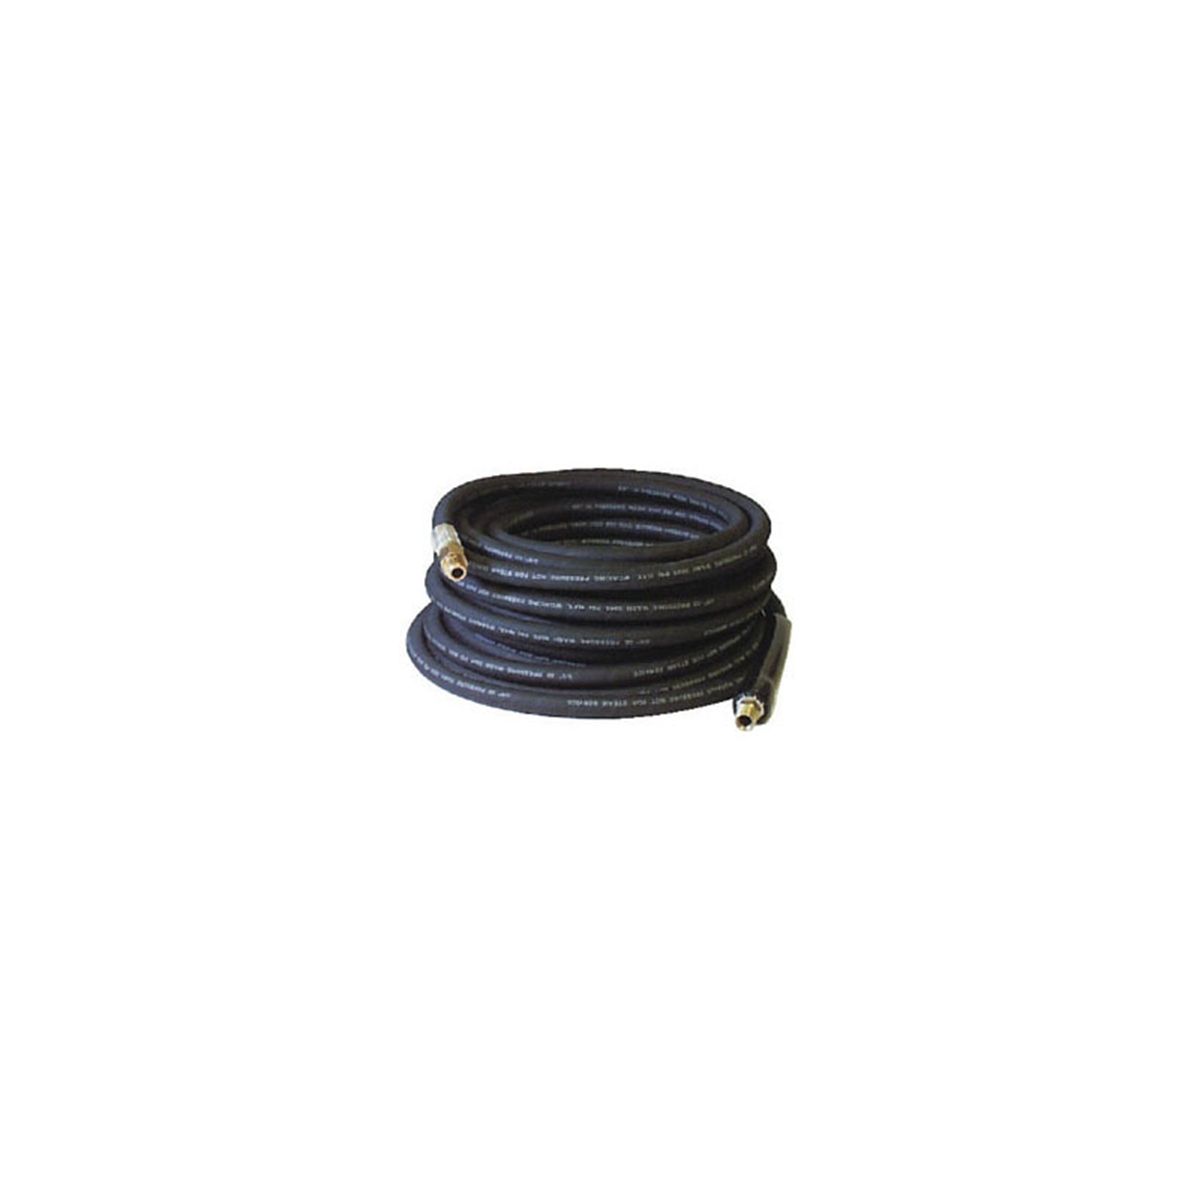 3/8 ID x 50 Ft Black Rubber Pressure Washer Hose Coupled MPT x M